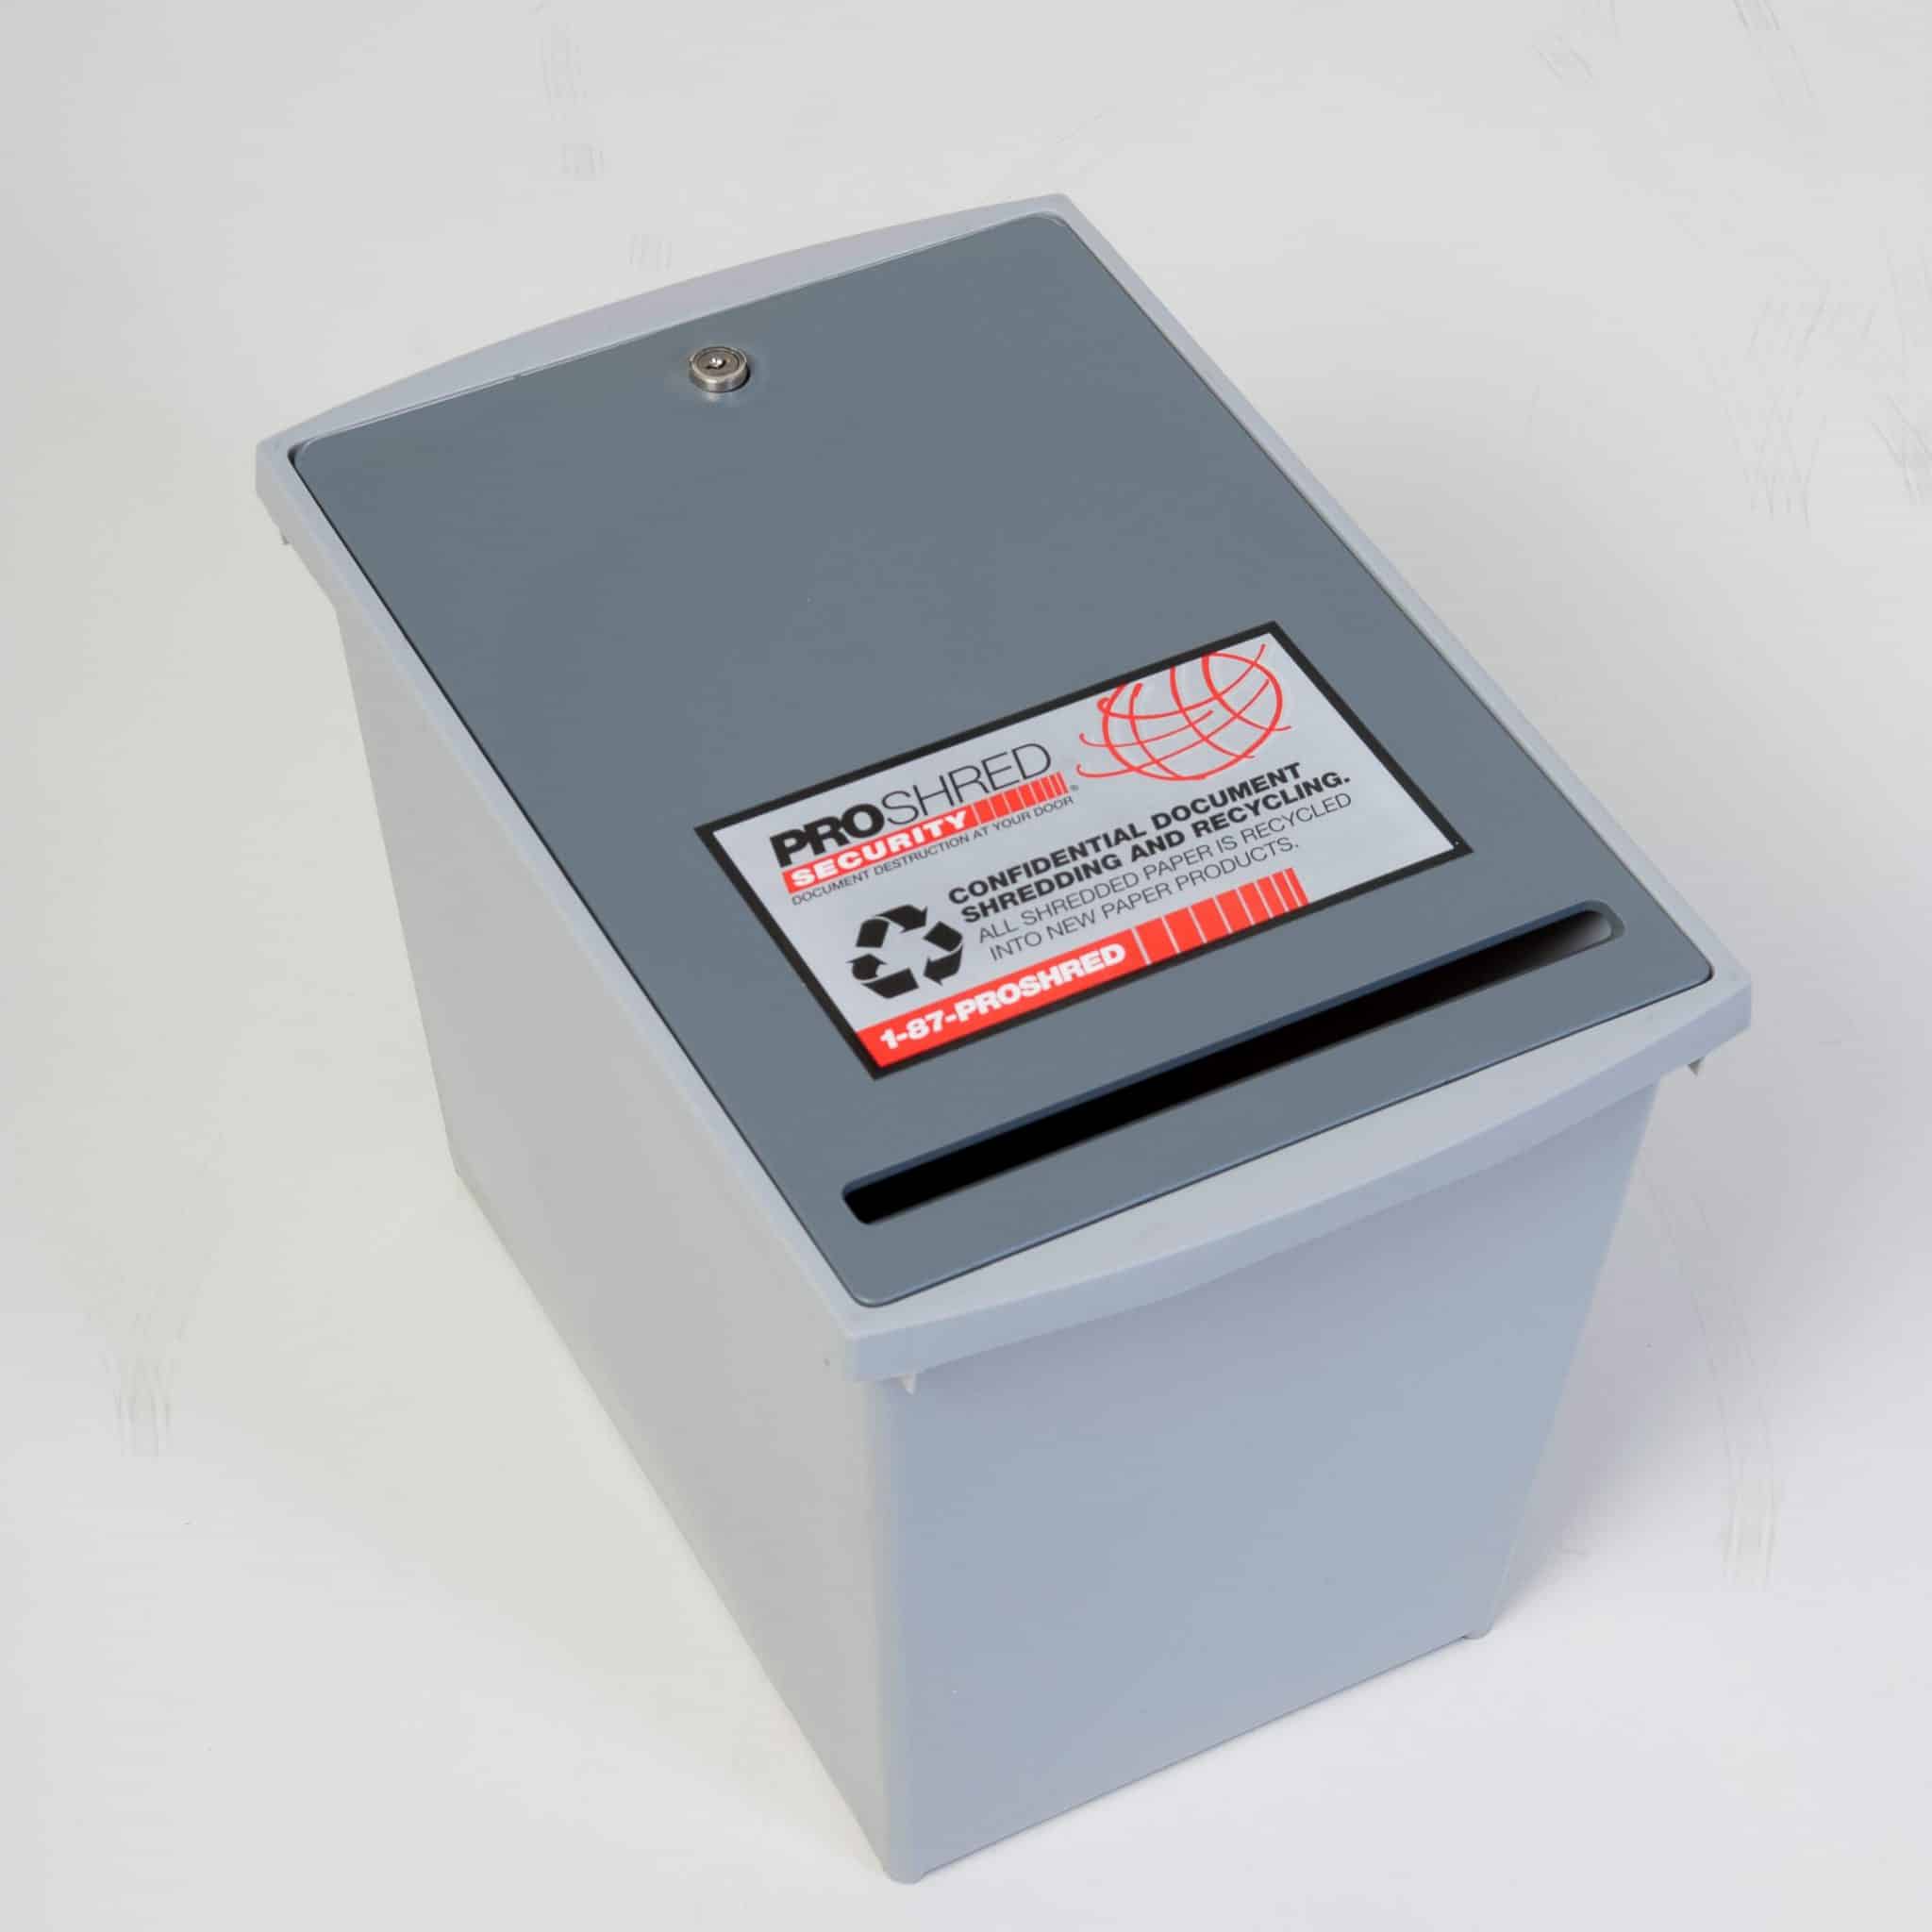 Personal desktop container (PDC) for document shredding.